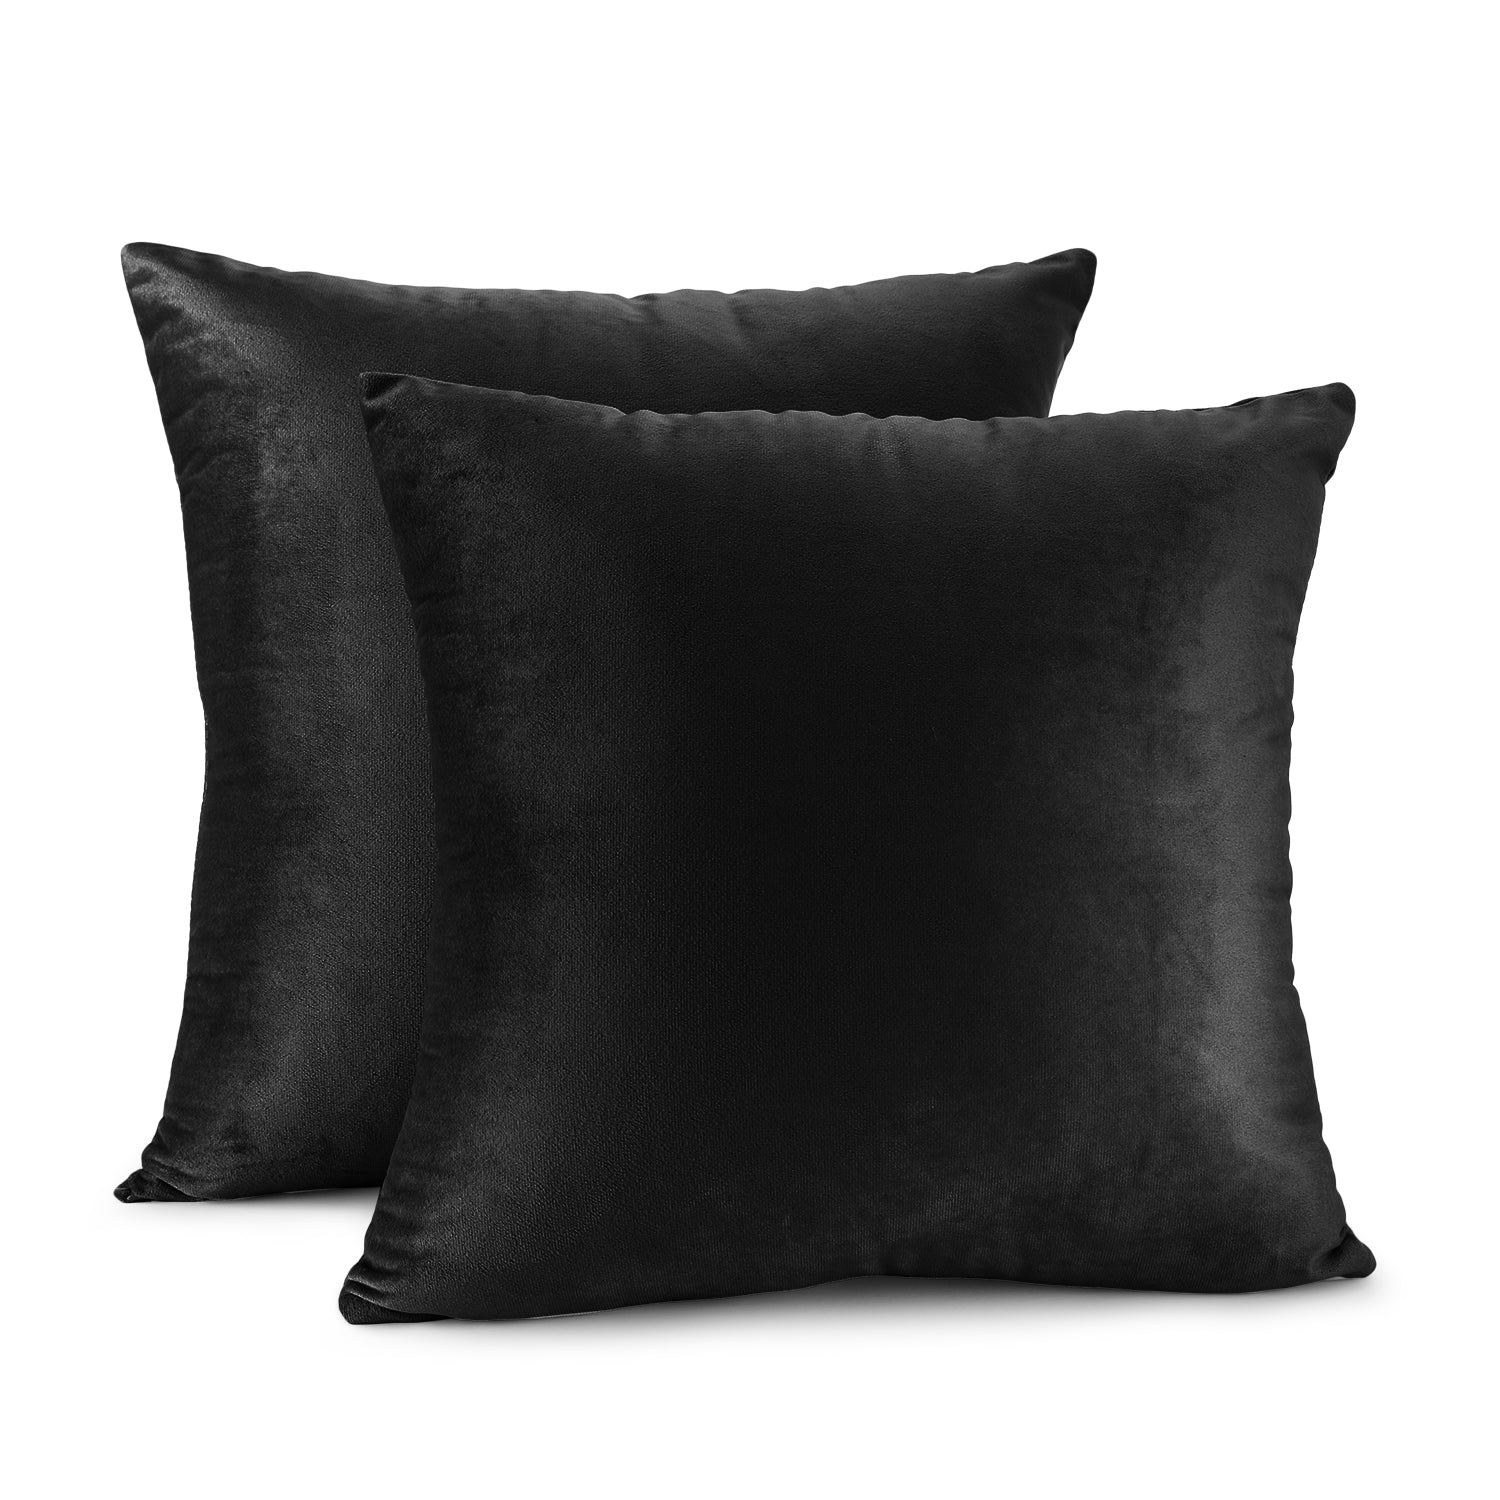 Pack of 2 Velvet Throw Pillows Sofa Decorative Throw Pillow Covers 18x18  Inch